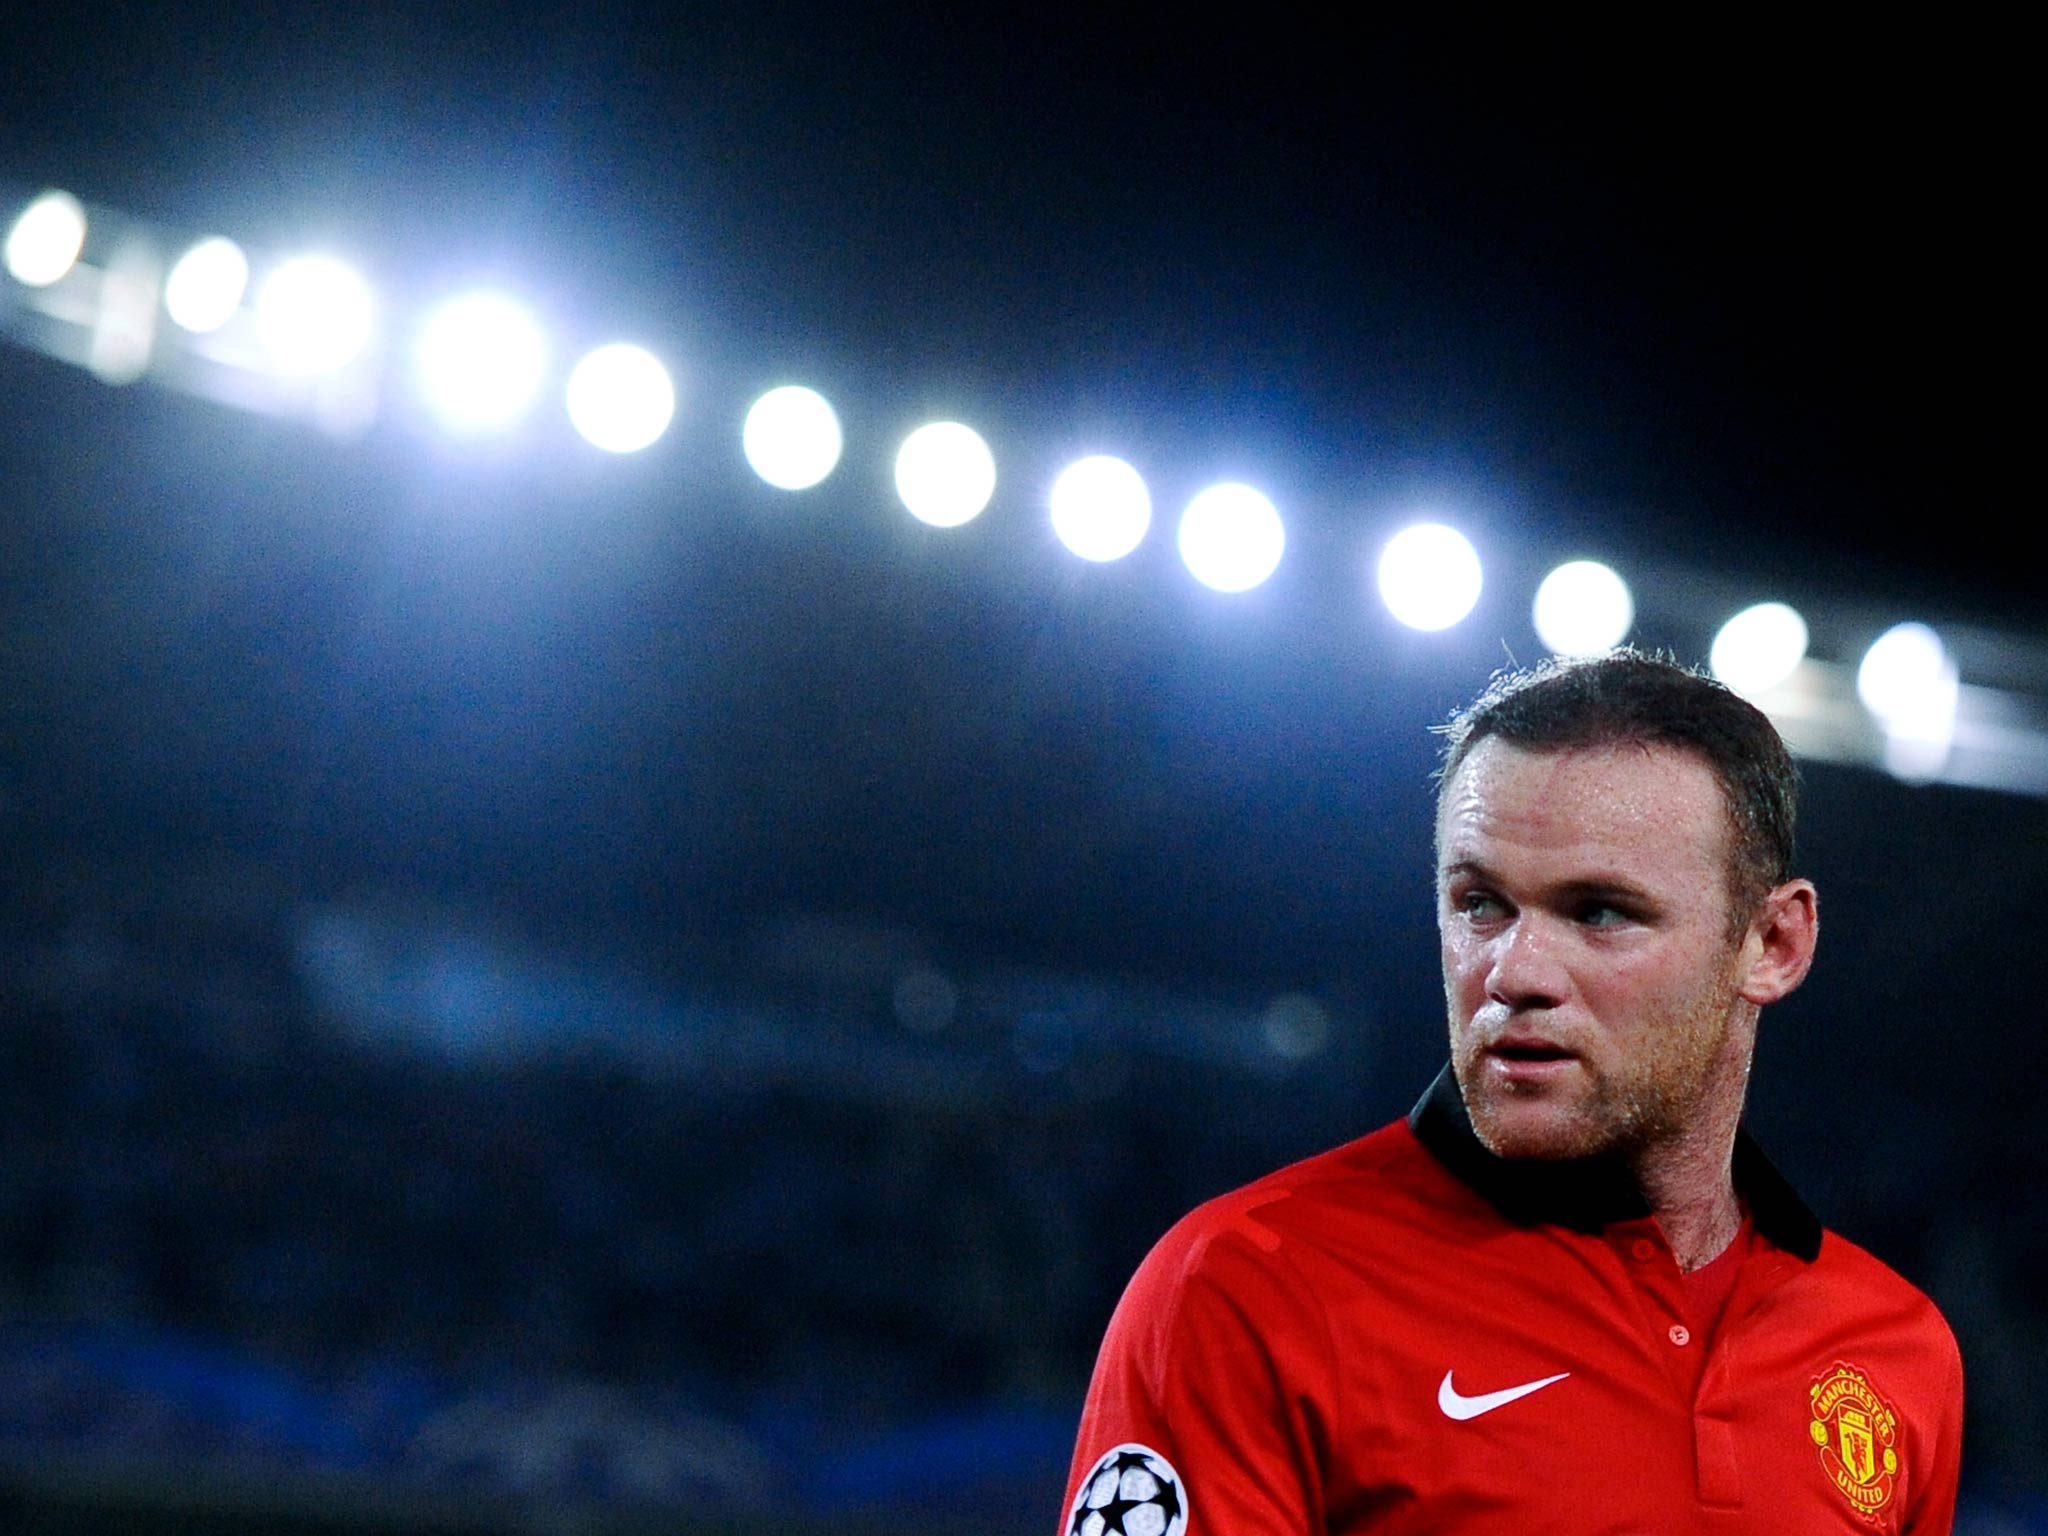 Wayne Rooney is among Manchester United's top earners